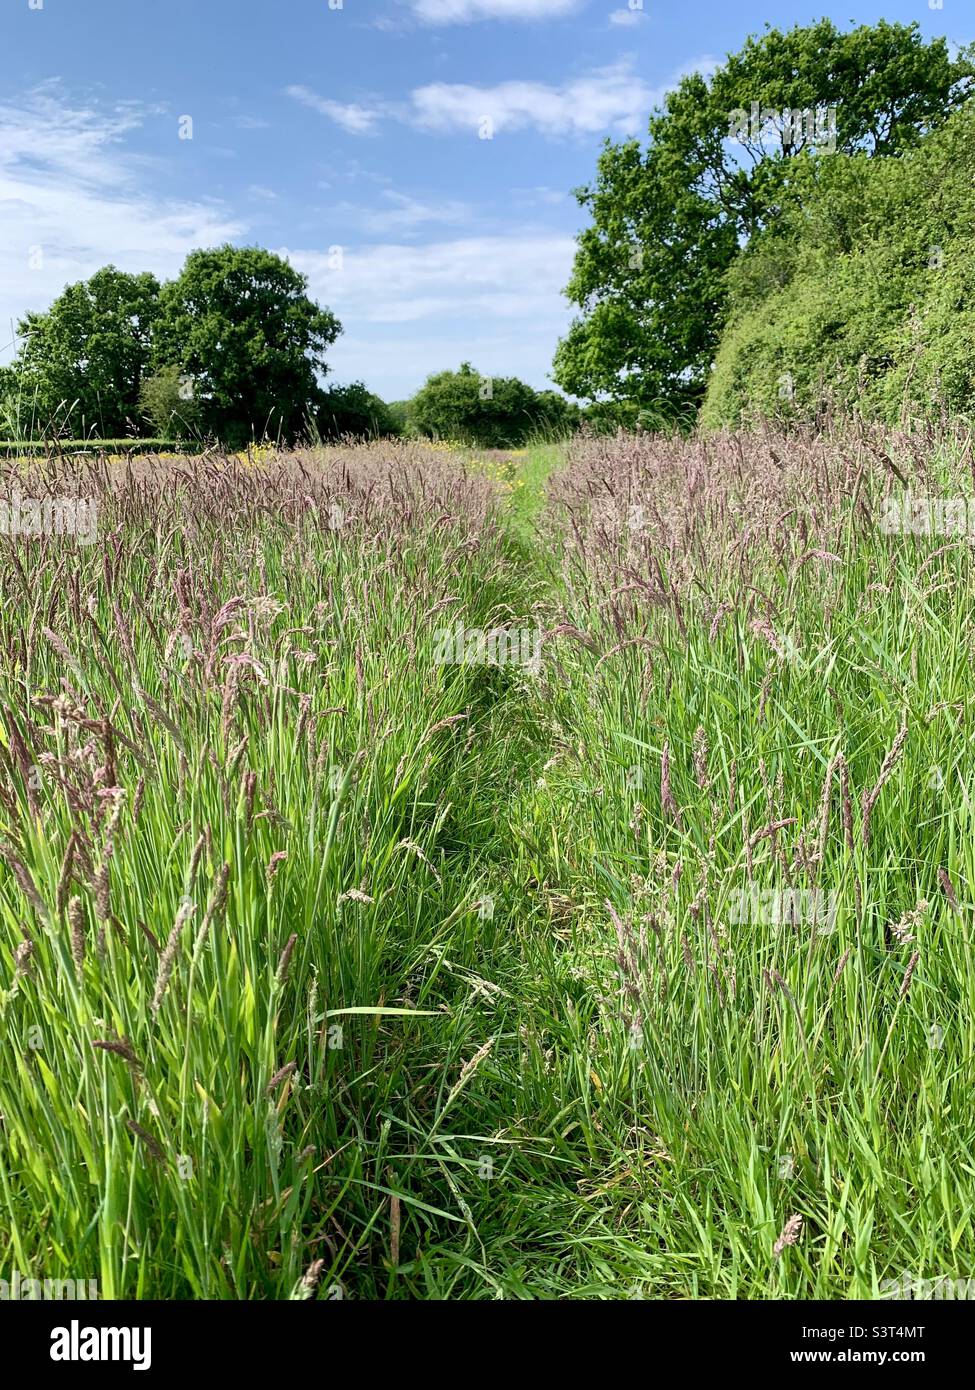 Footpath through field meadow of long grass Stock Photo